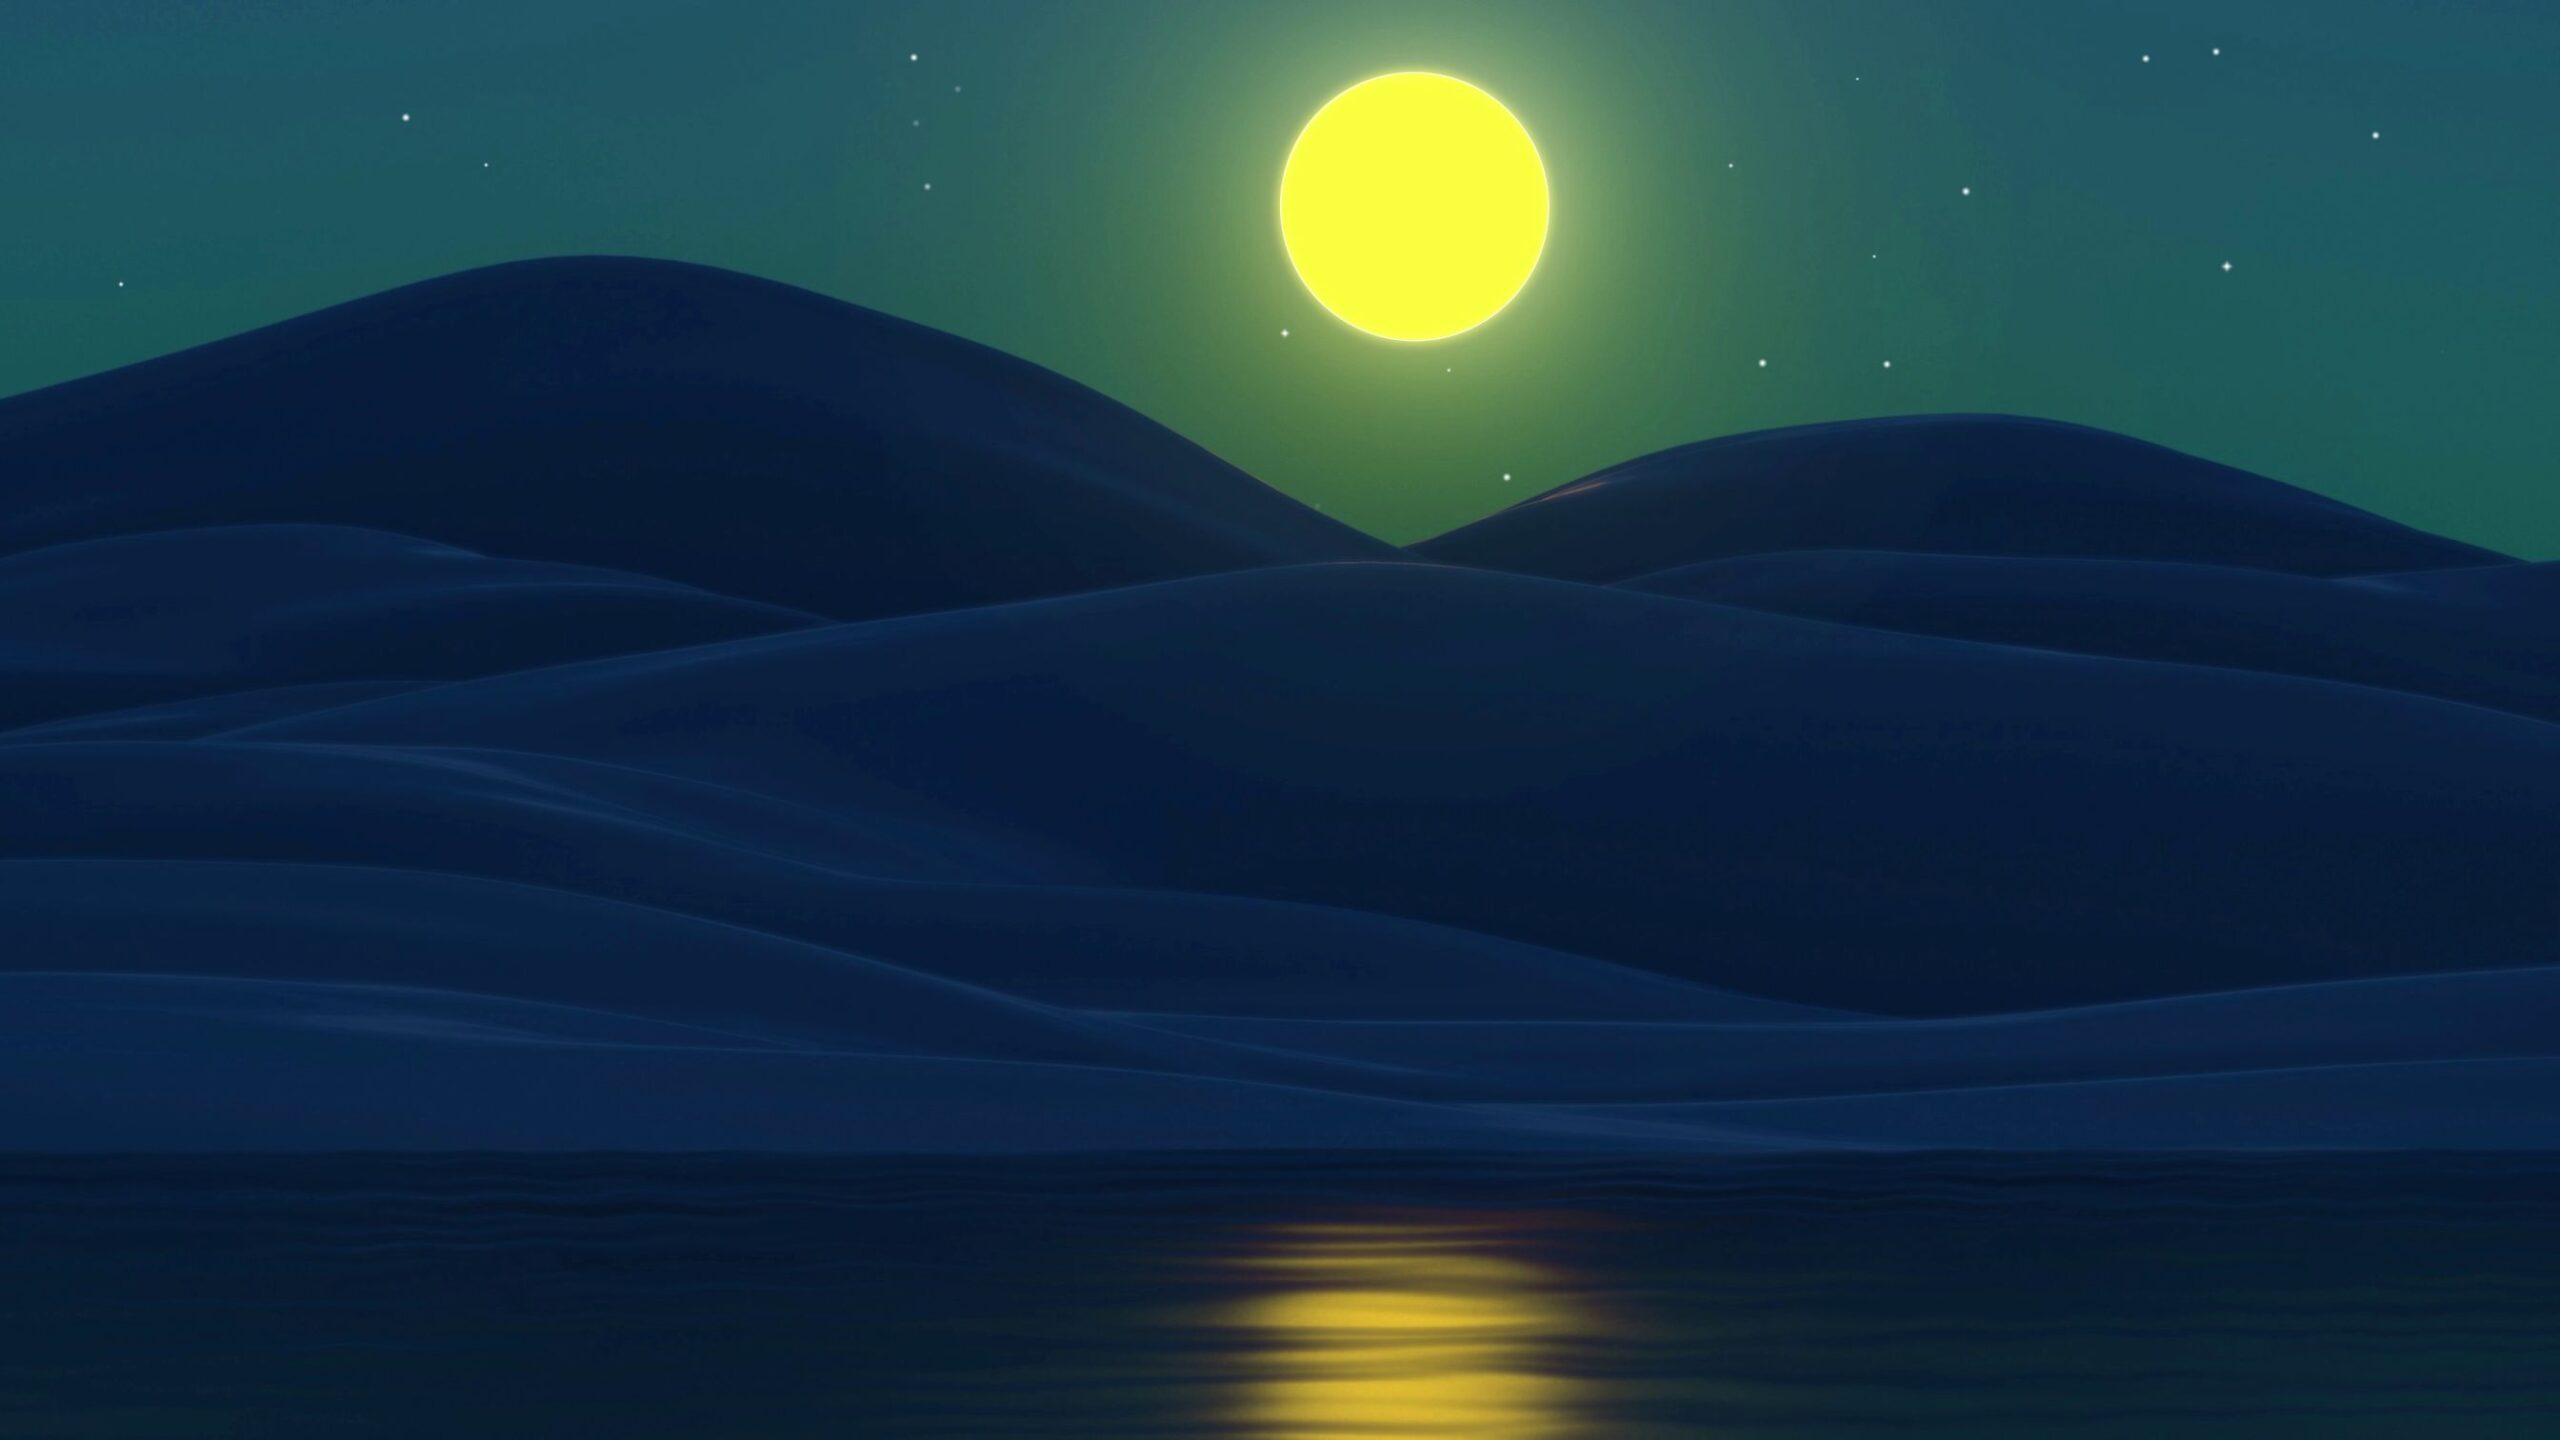 Animated Moon Shining Over Water Screensaver with Relaxing Music | 4K Motion Background FREE DOWNLOAD